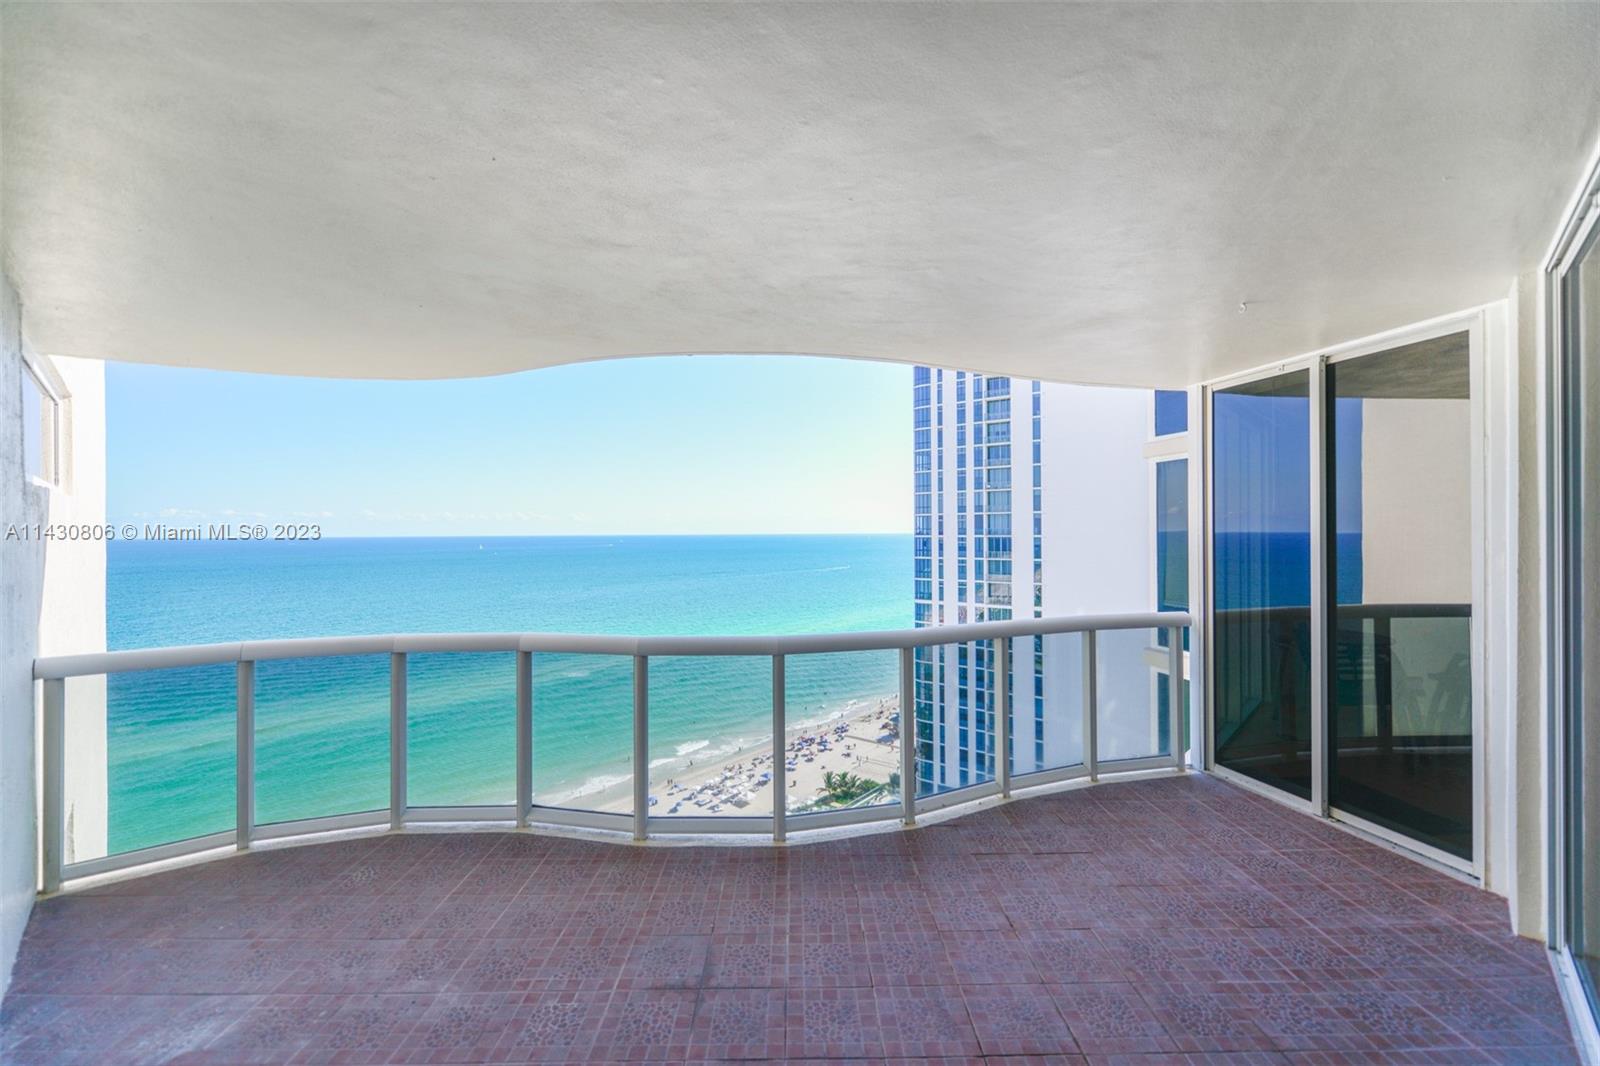 Overlooking two bodies of water, the Atlantic Ocean and Intracoastal is Pinnacle #2202. This elegant, spacious, and flow-thru unit is available for Sale. Situated in the heart of Sunny Isles Beach, the property has two balconies with both east and west exposure providing an abundance of natural light. Enjoy this resort style ocean front development's luxurious amenities including a state of the art gym, swimming pool, and tennis court.